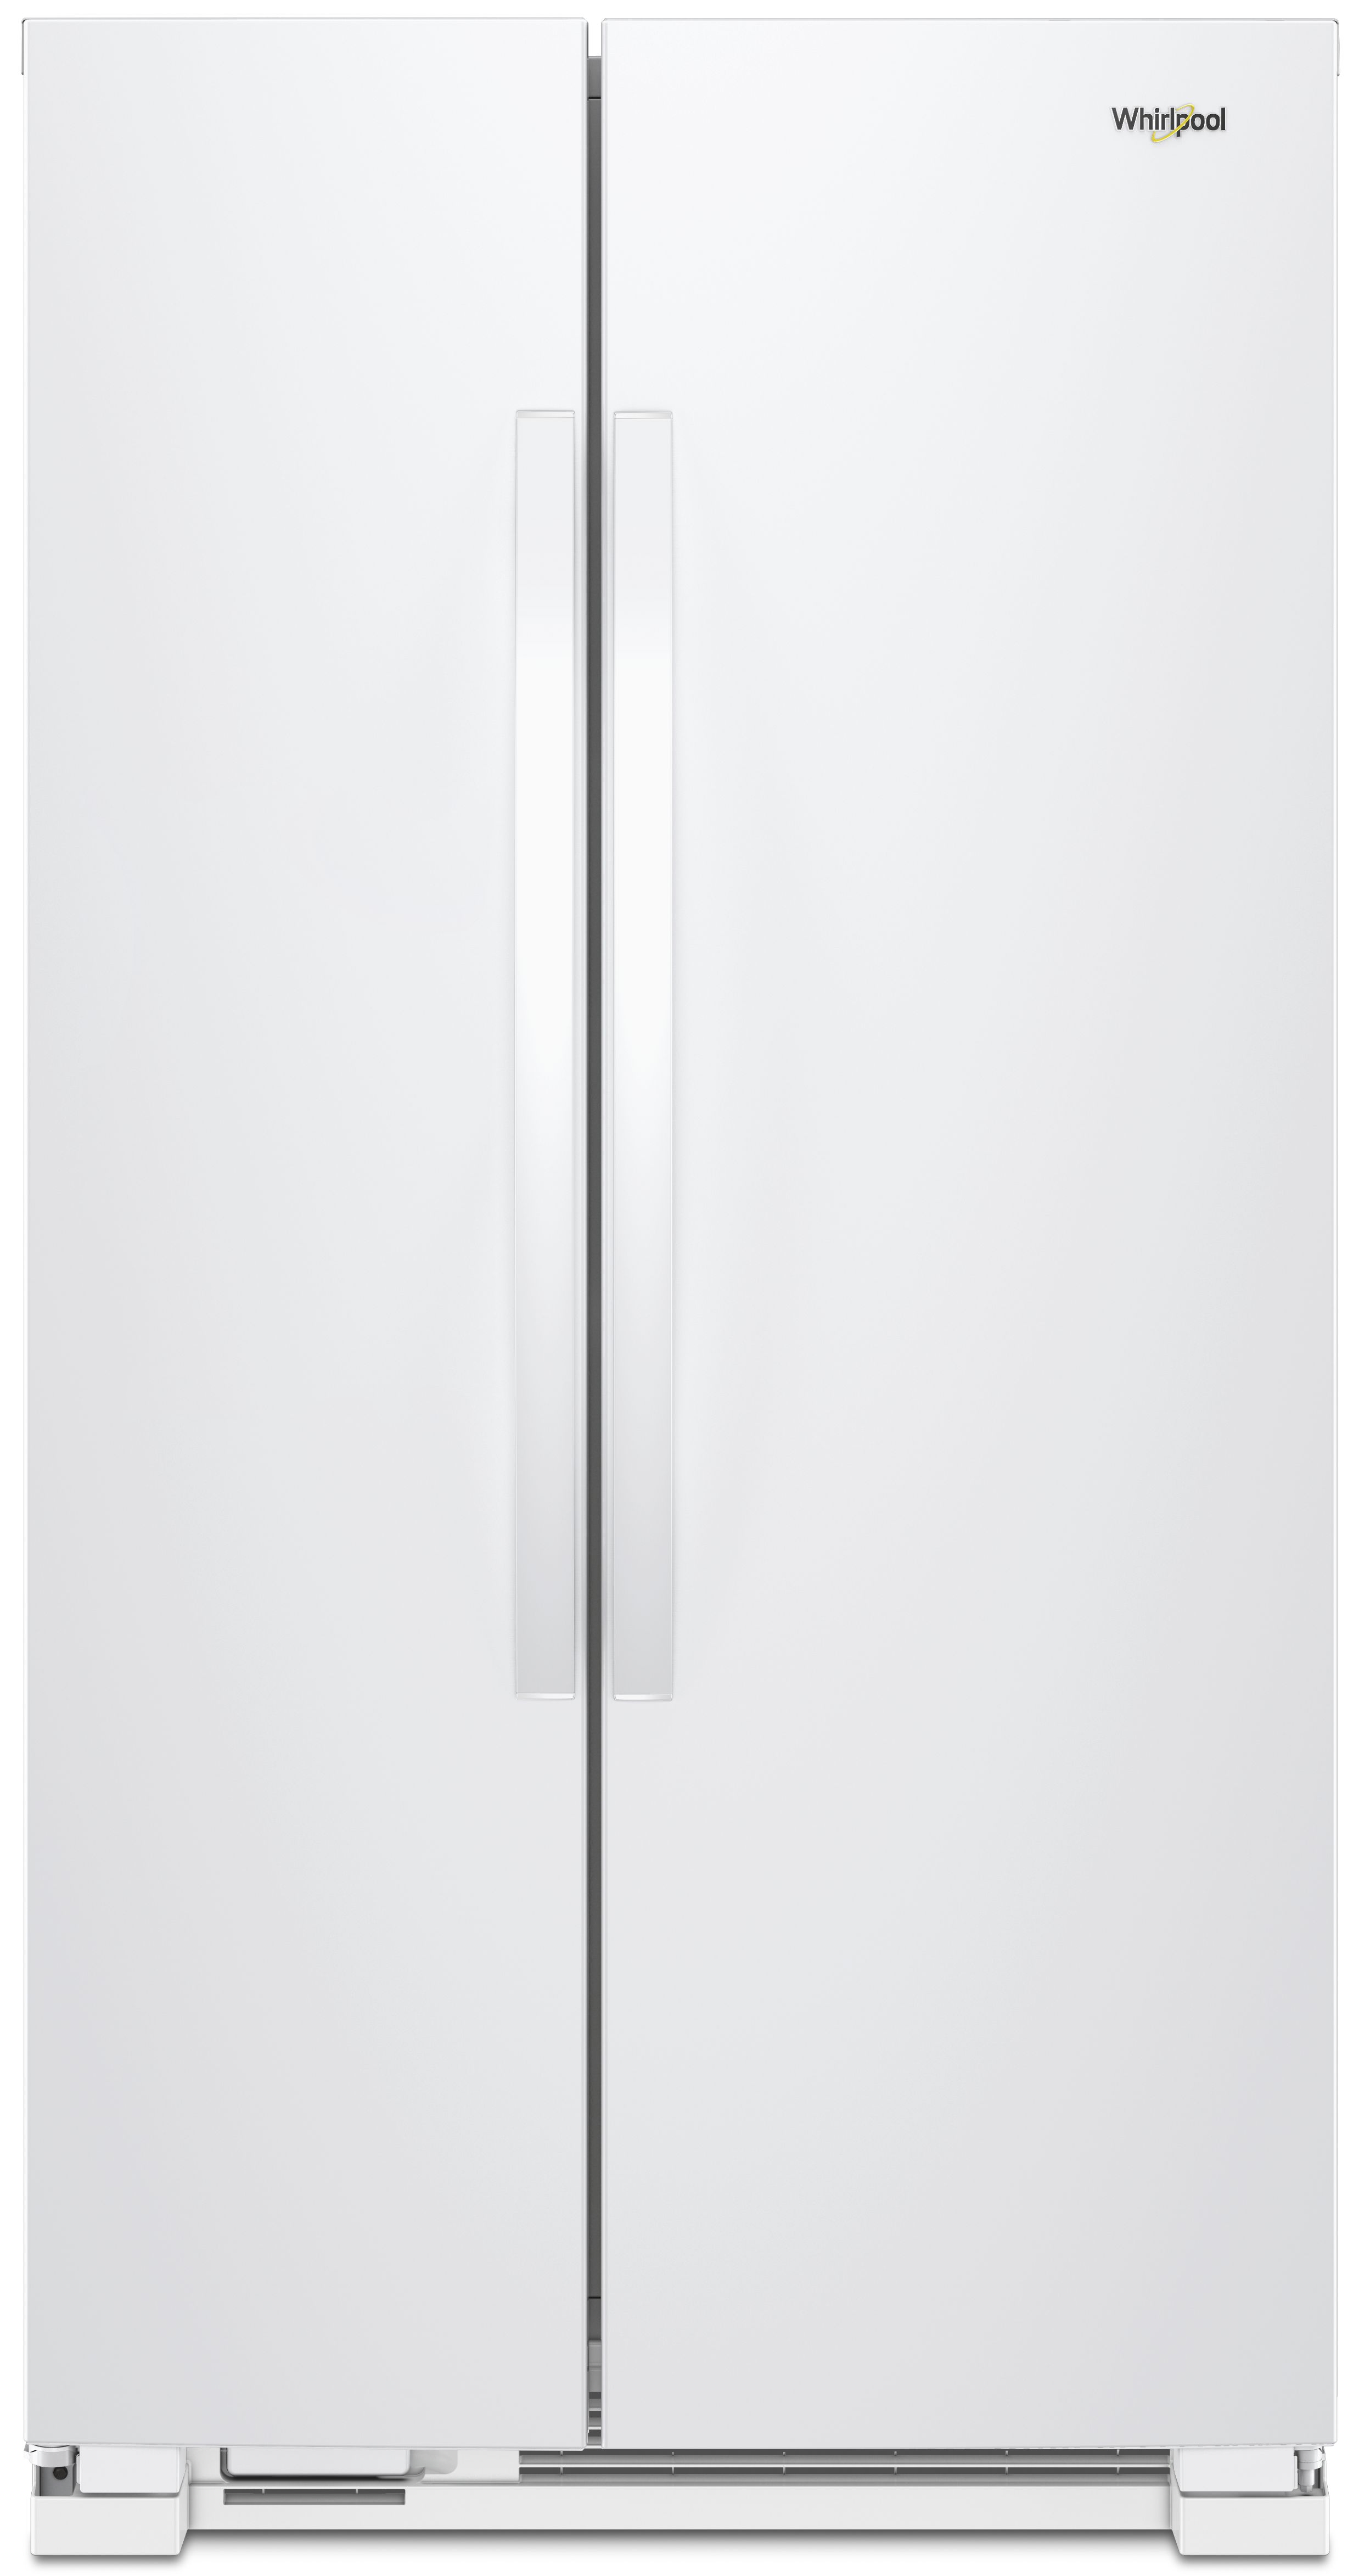 Whirlpool® 21.7 Cu. Ft. Side-By-Side Refrigerator-White